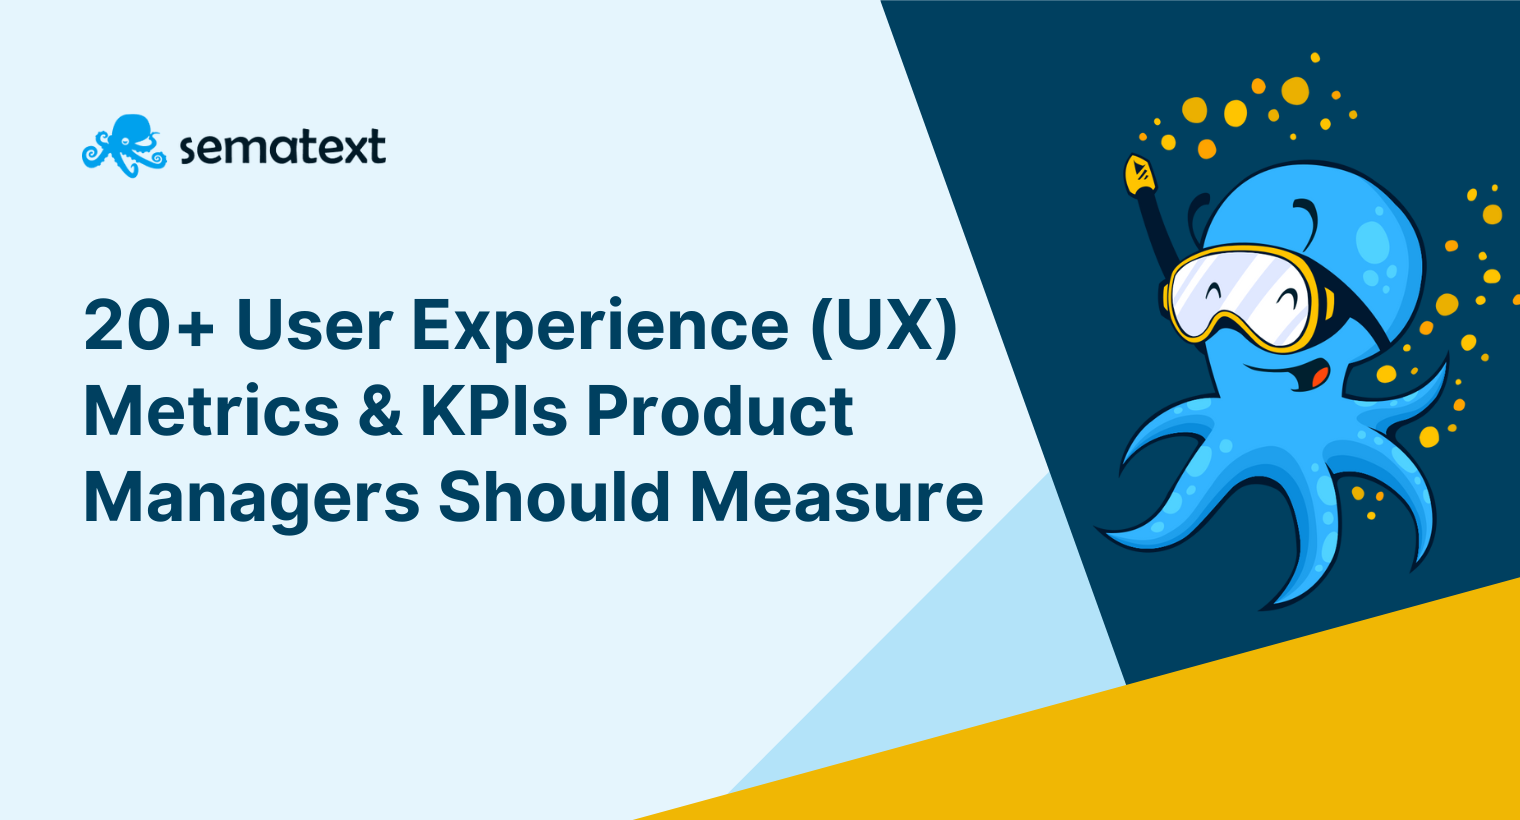 20+ UX Metrics & KPIs Product Managers Should Measure for User Experience